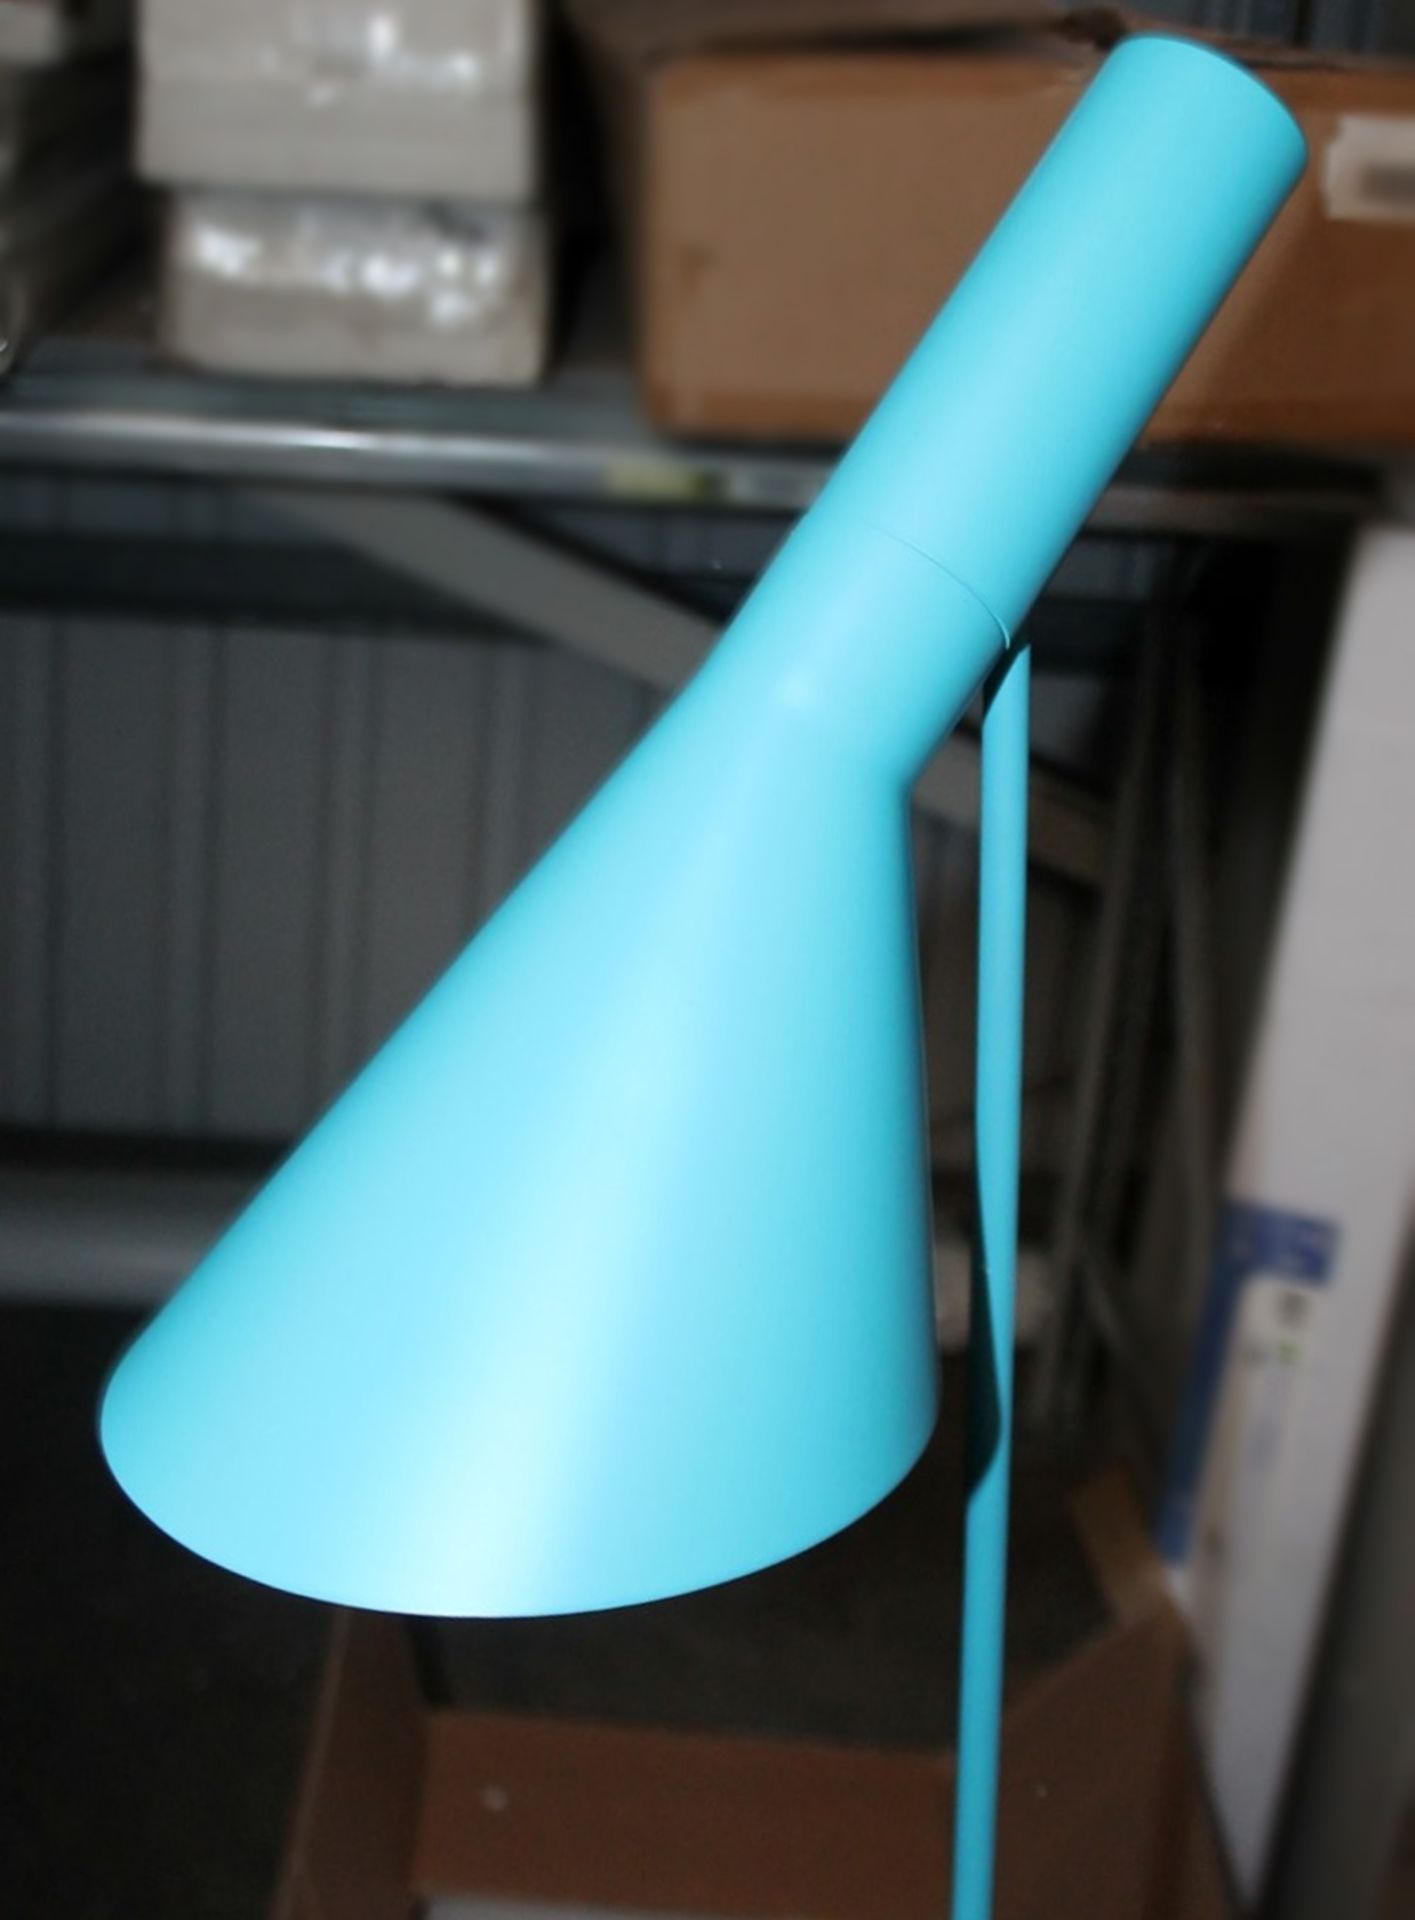 1 x Arn Jacobson Inspired Retro 60s-style Lamp In Bright Blue - New Boxed Stock - Image 2 of 7